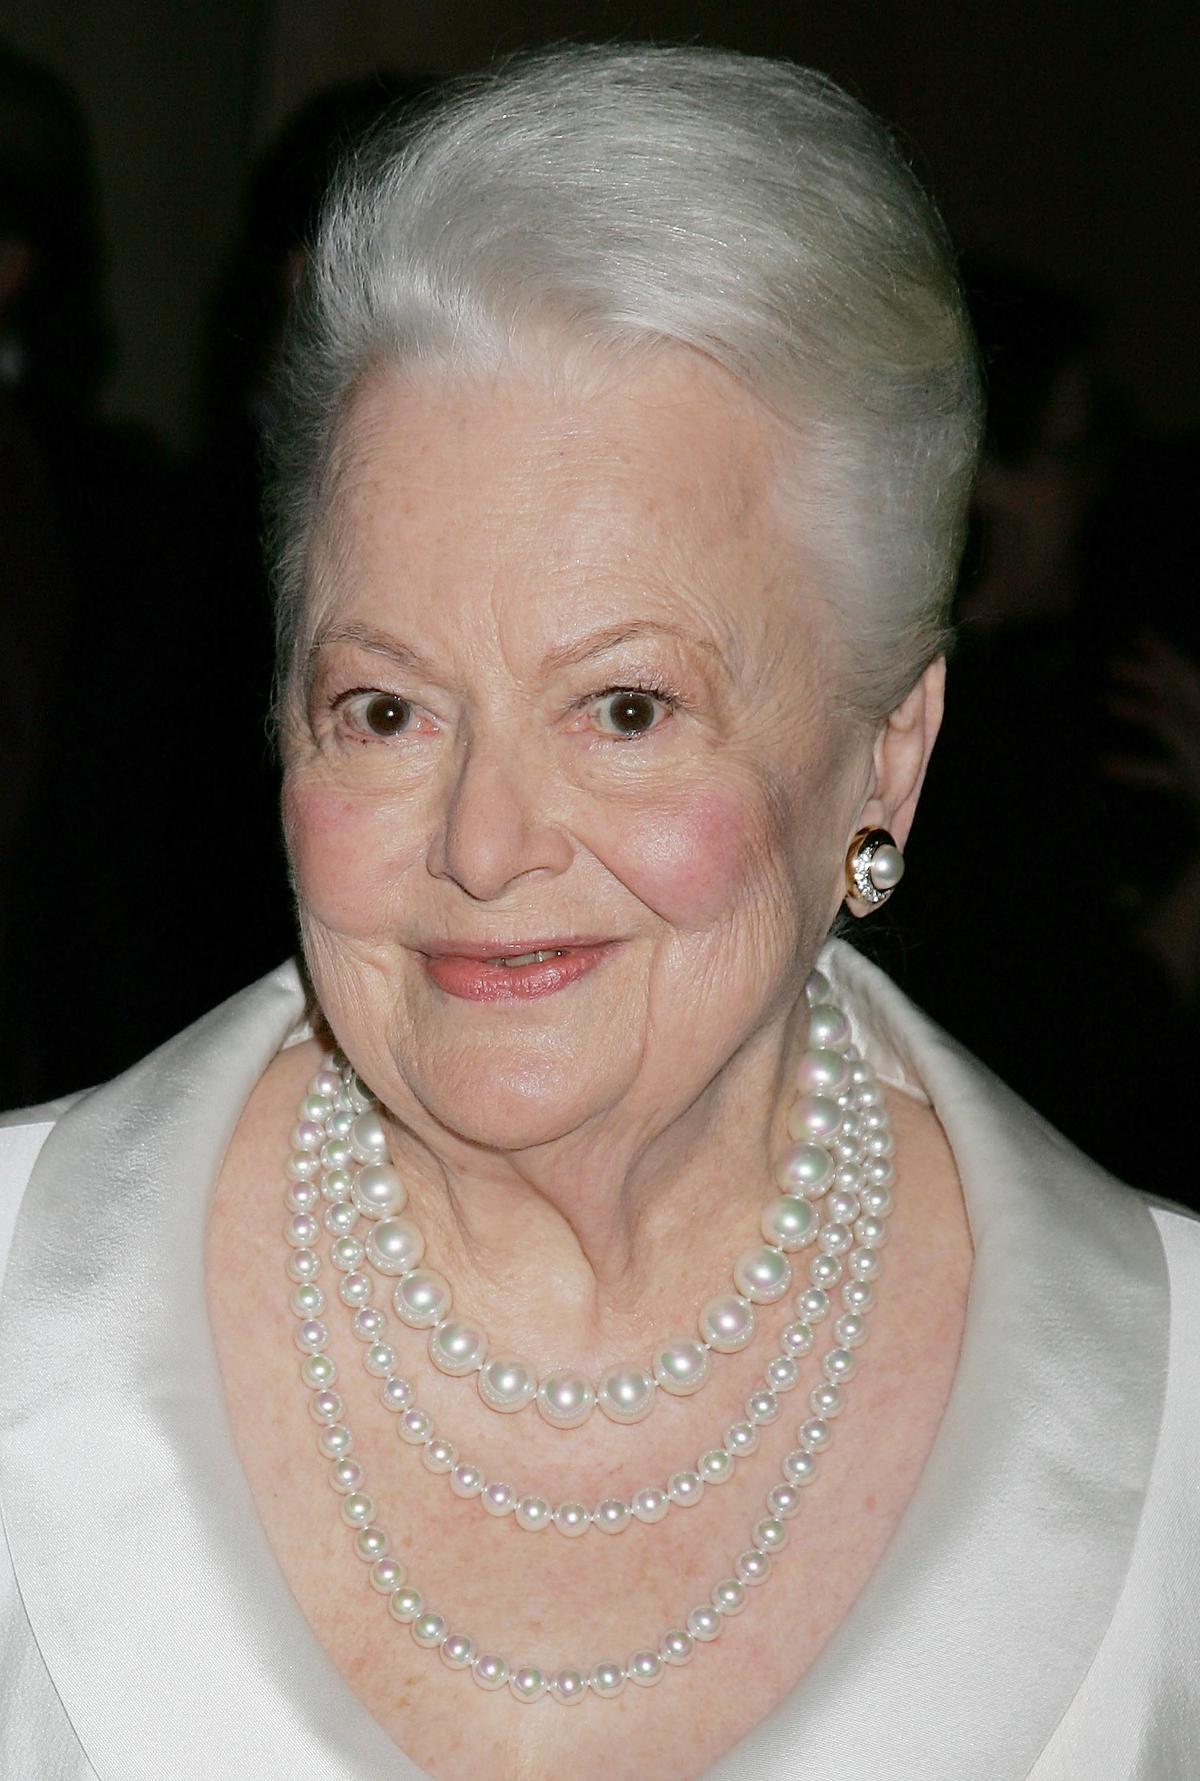 Olivia de Havilland at her Academy of Motion Picture Arts and Sciences' tribute in Beverly Hills, California, on June 15, 2006 (David Livingston/Getty Images)